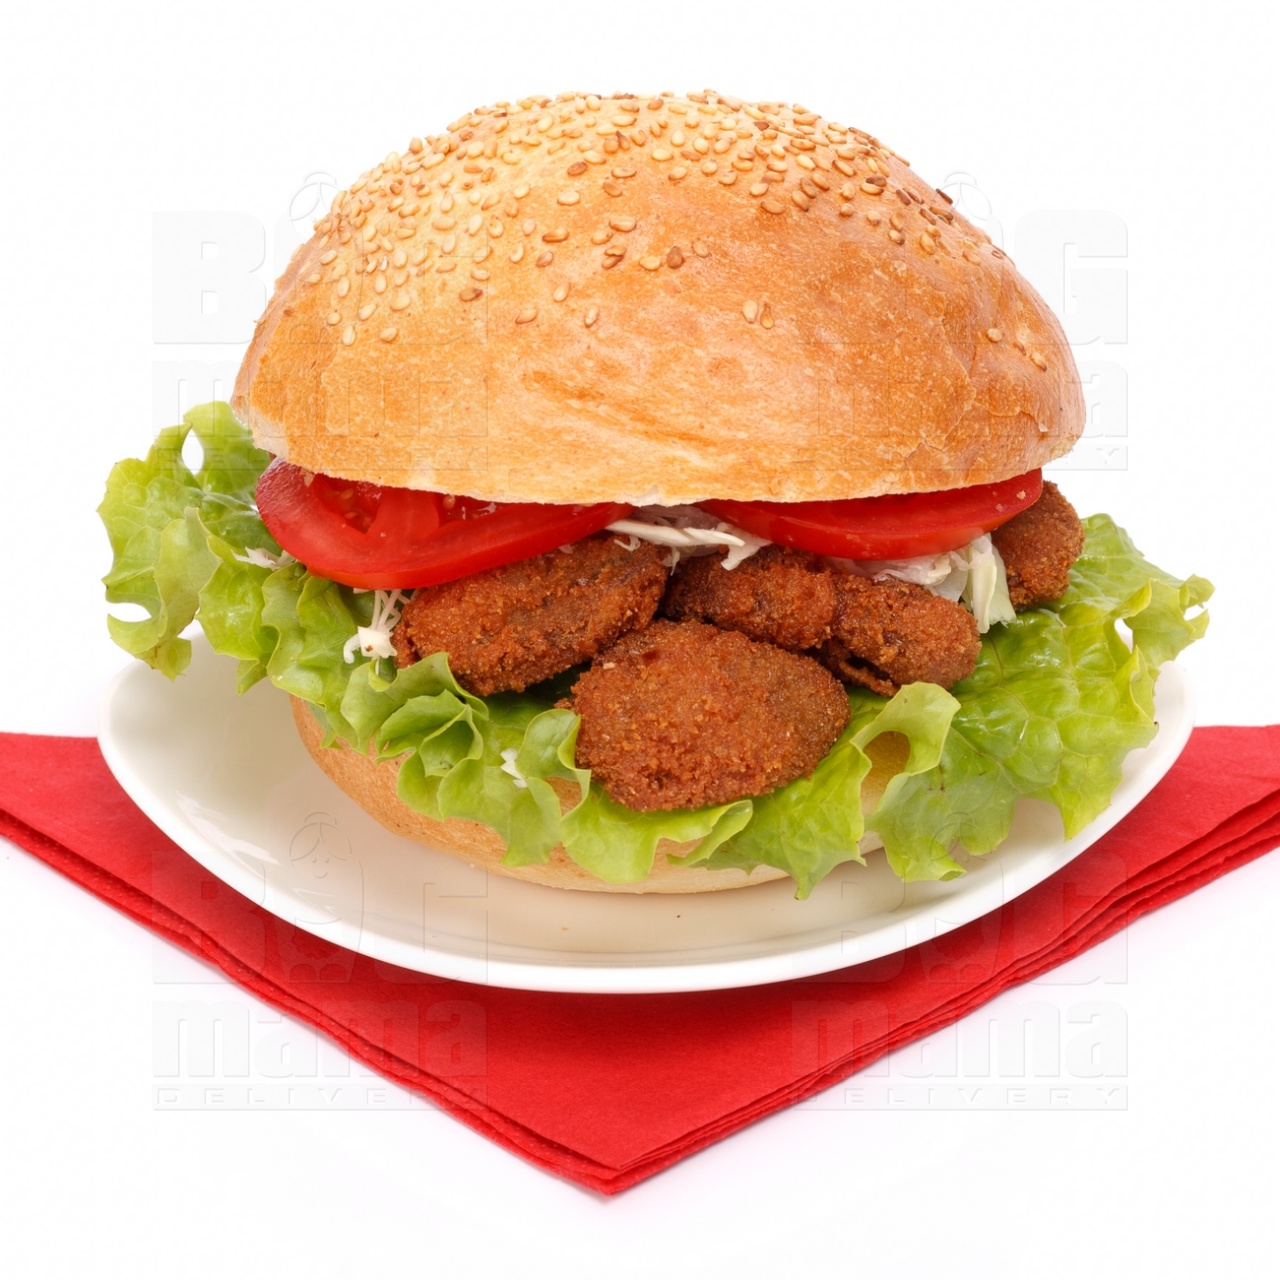 Product #63 image - Small sandwich with breaded mushrooms